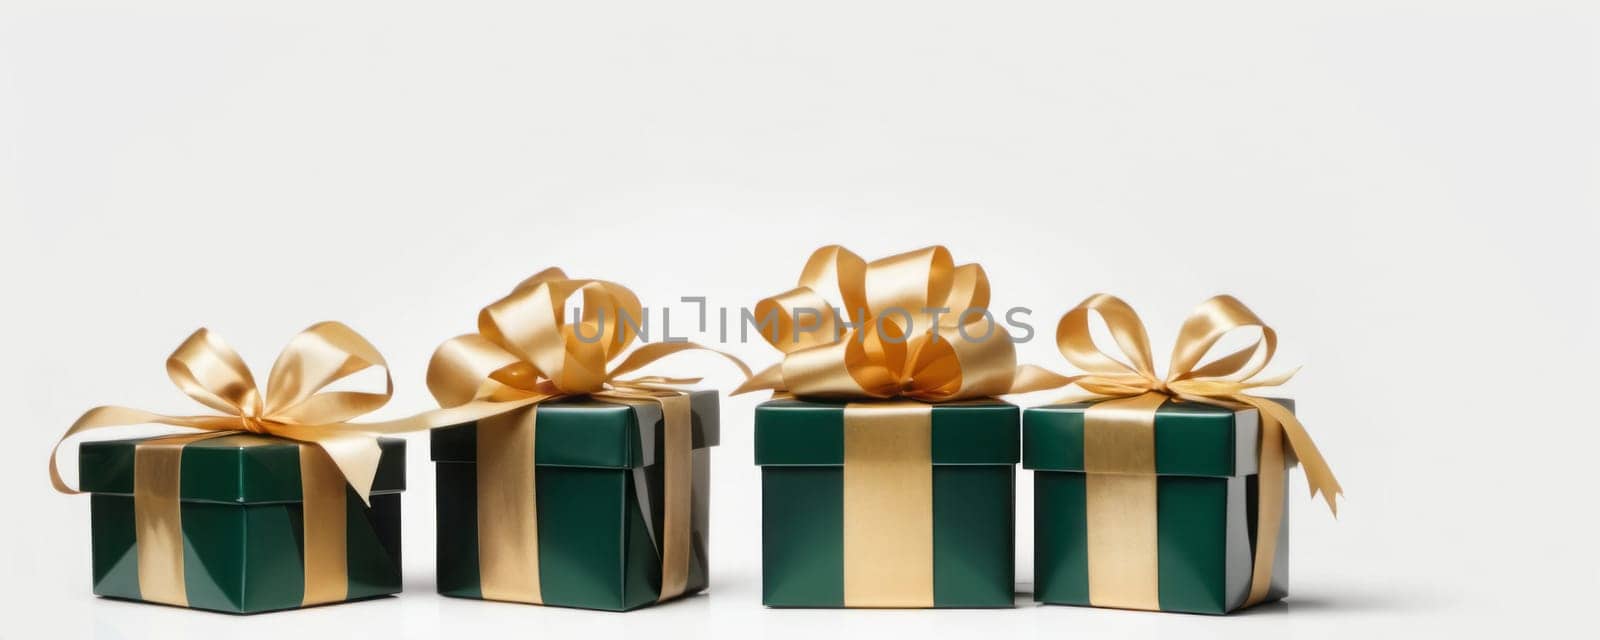 Four square-shaped gift boxes wrapped in dark green paper with golden ribbons, exuding elegance and luxury